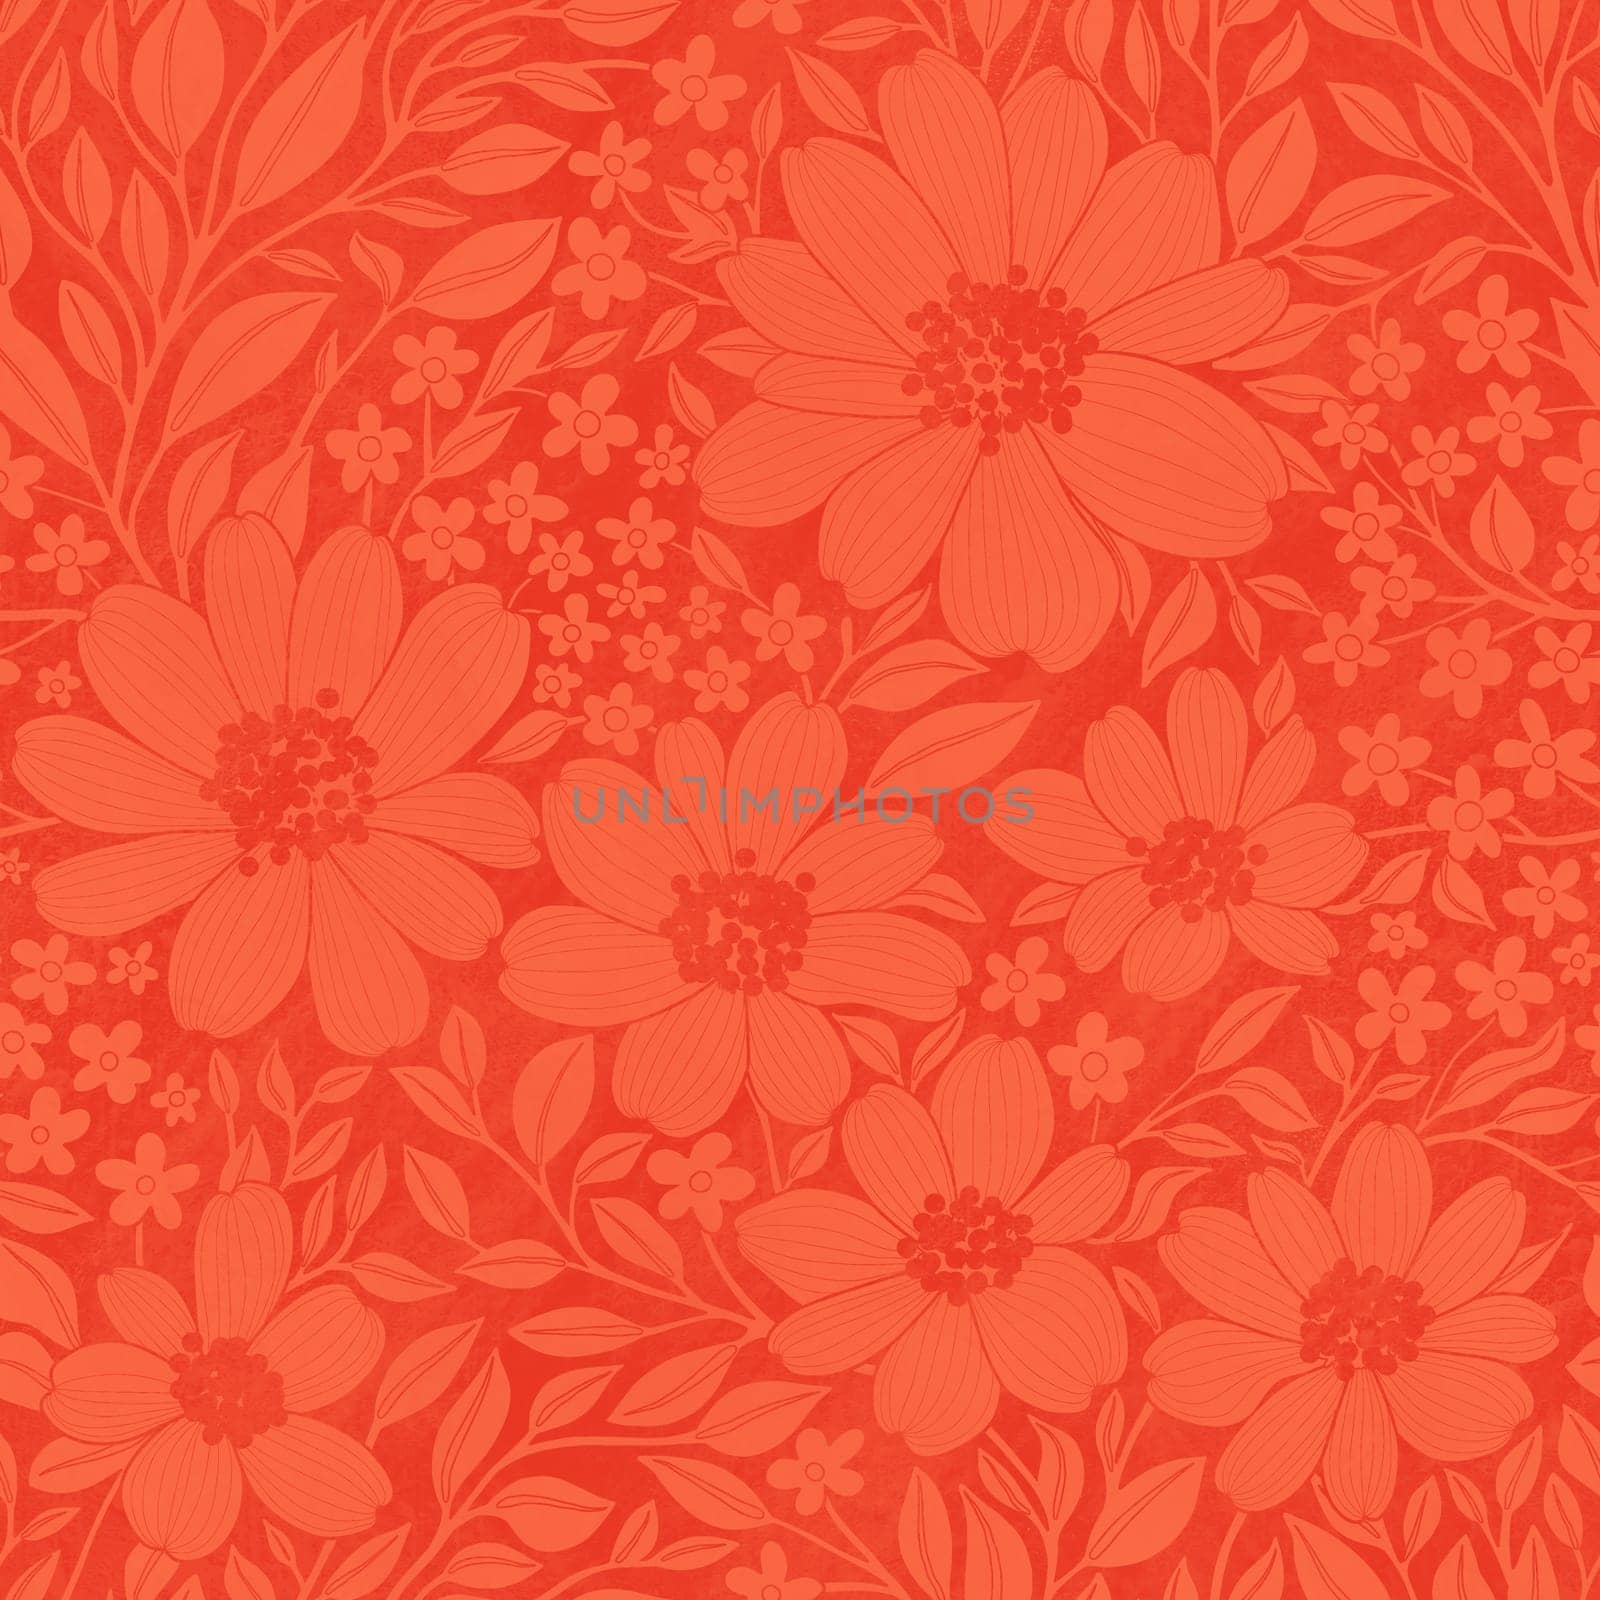 Floral Seamless Pattern of Red Flowers and Leaves on Red Tomato Backgroun with Texture by LanaLeta